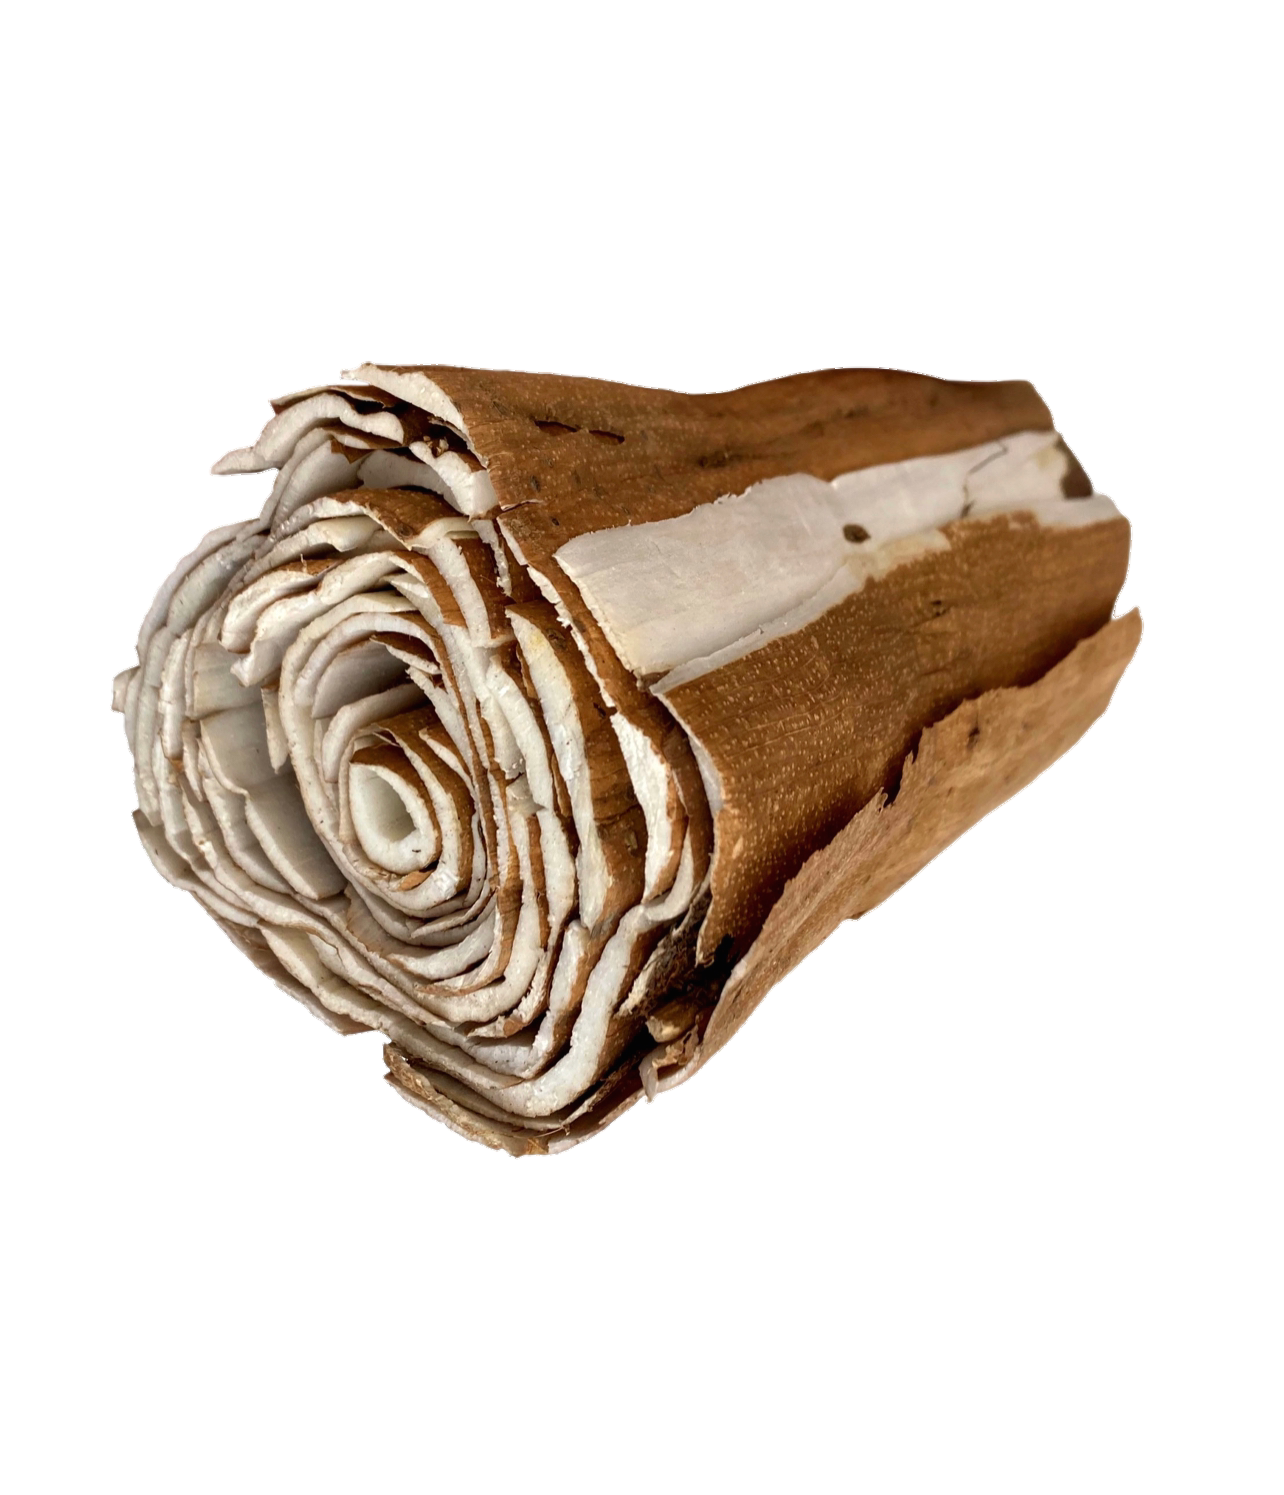 Super Soft Sola Toilet Paper Roll with Bark - by Feathered Addictions